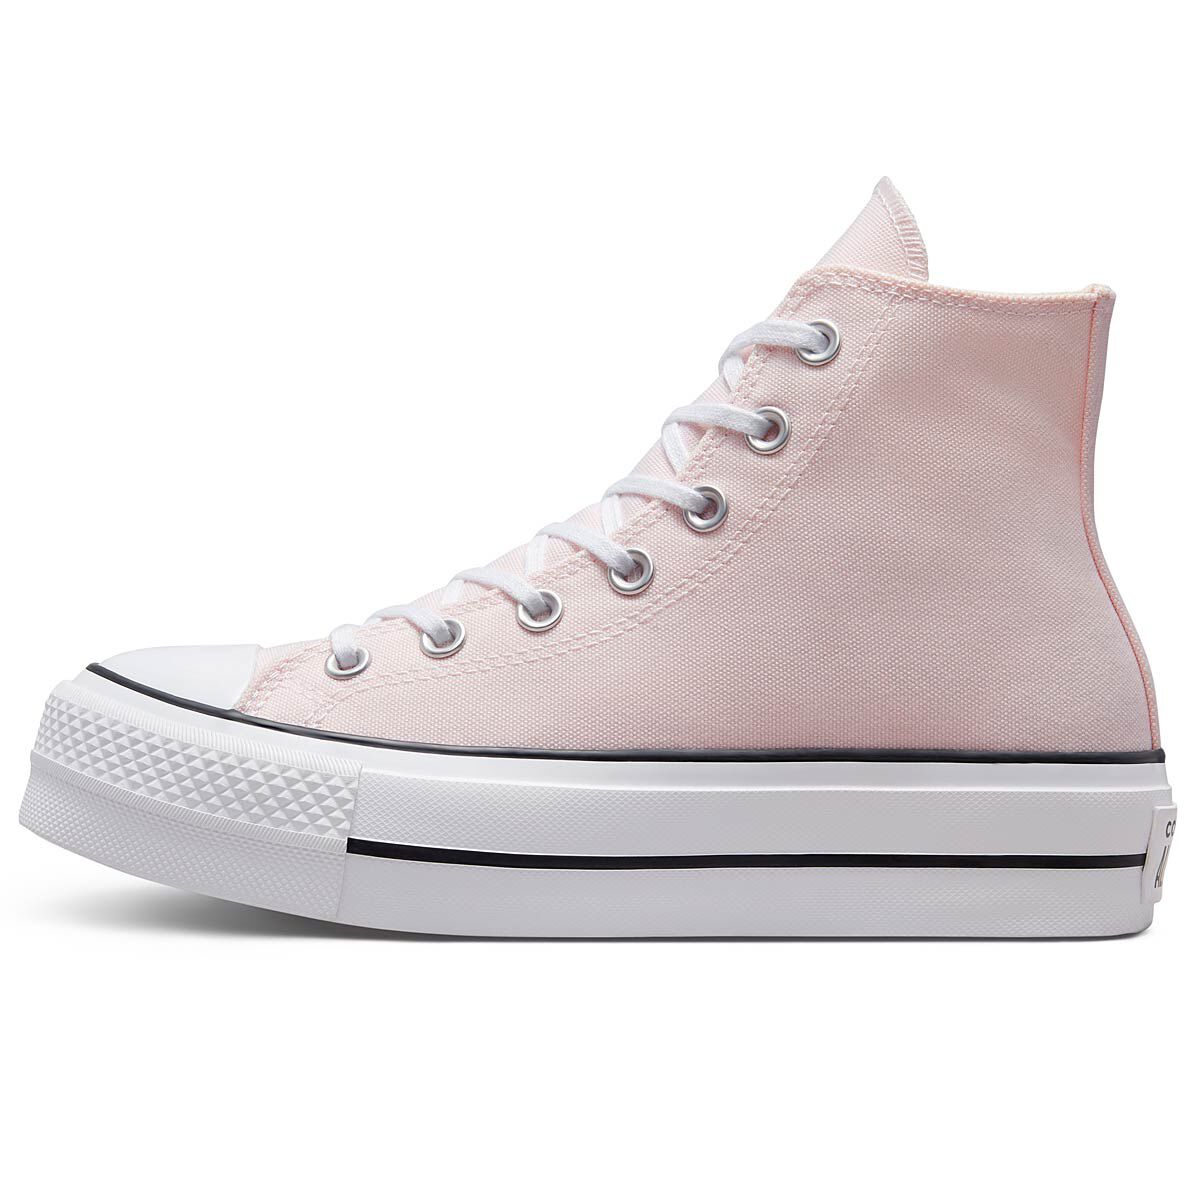 Sneakers and shoes Converse Pro Leather on sale